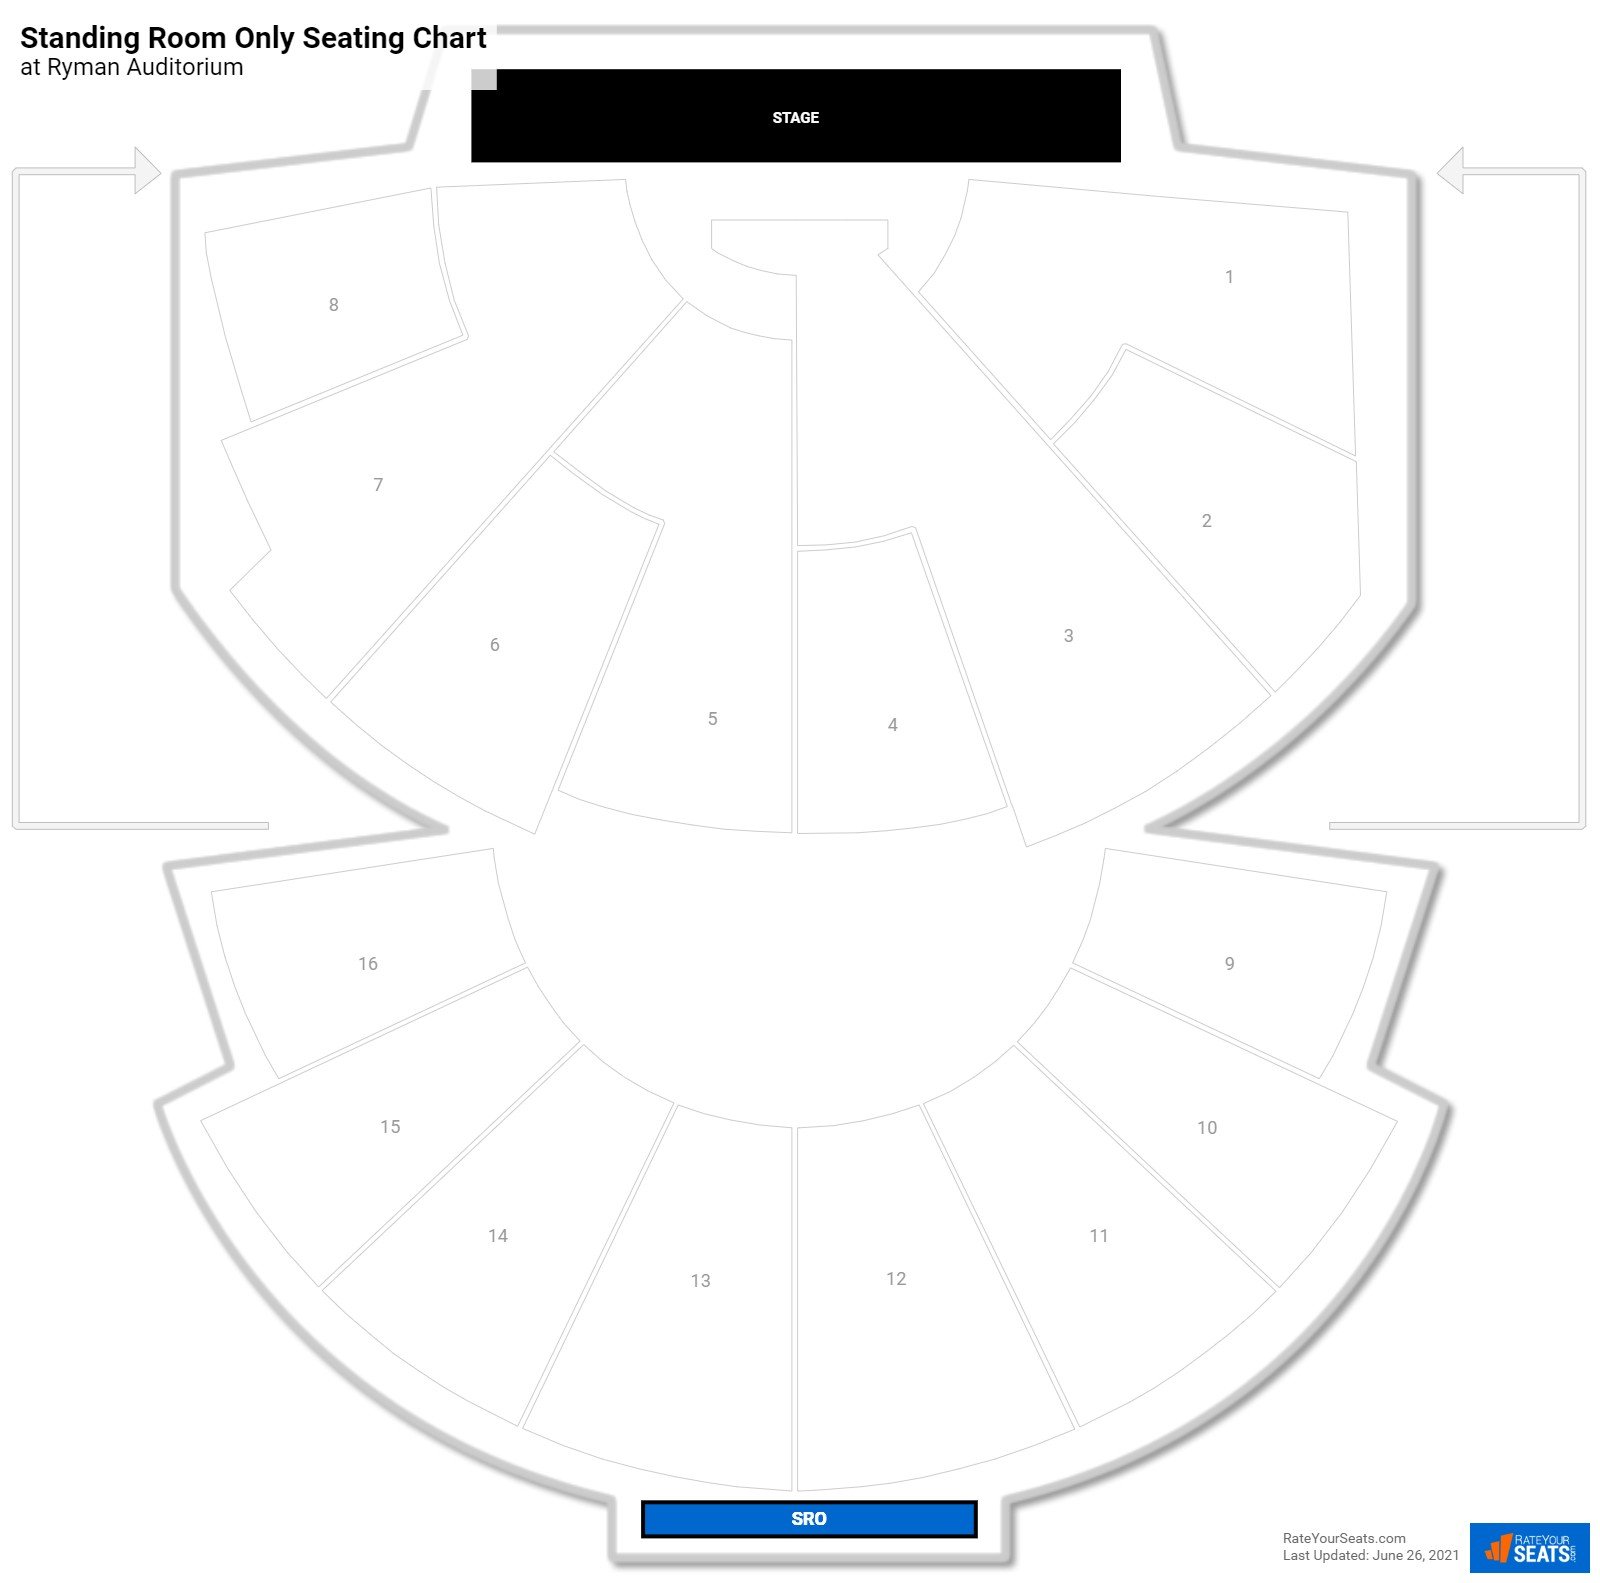 Concert Standing Room Only Seating Chart at Ryman Auditorium